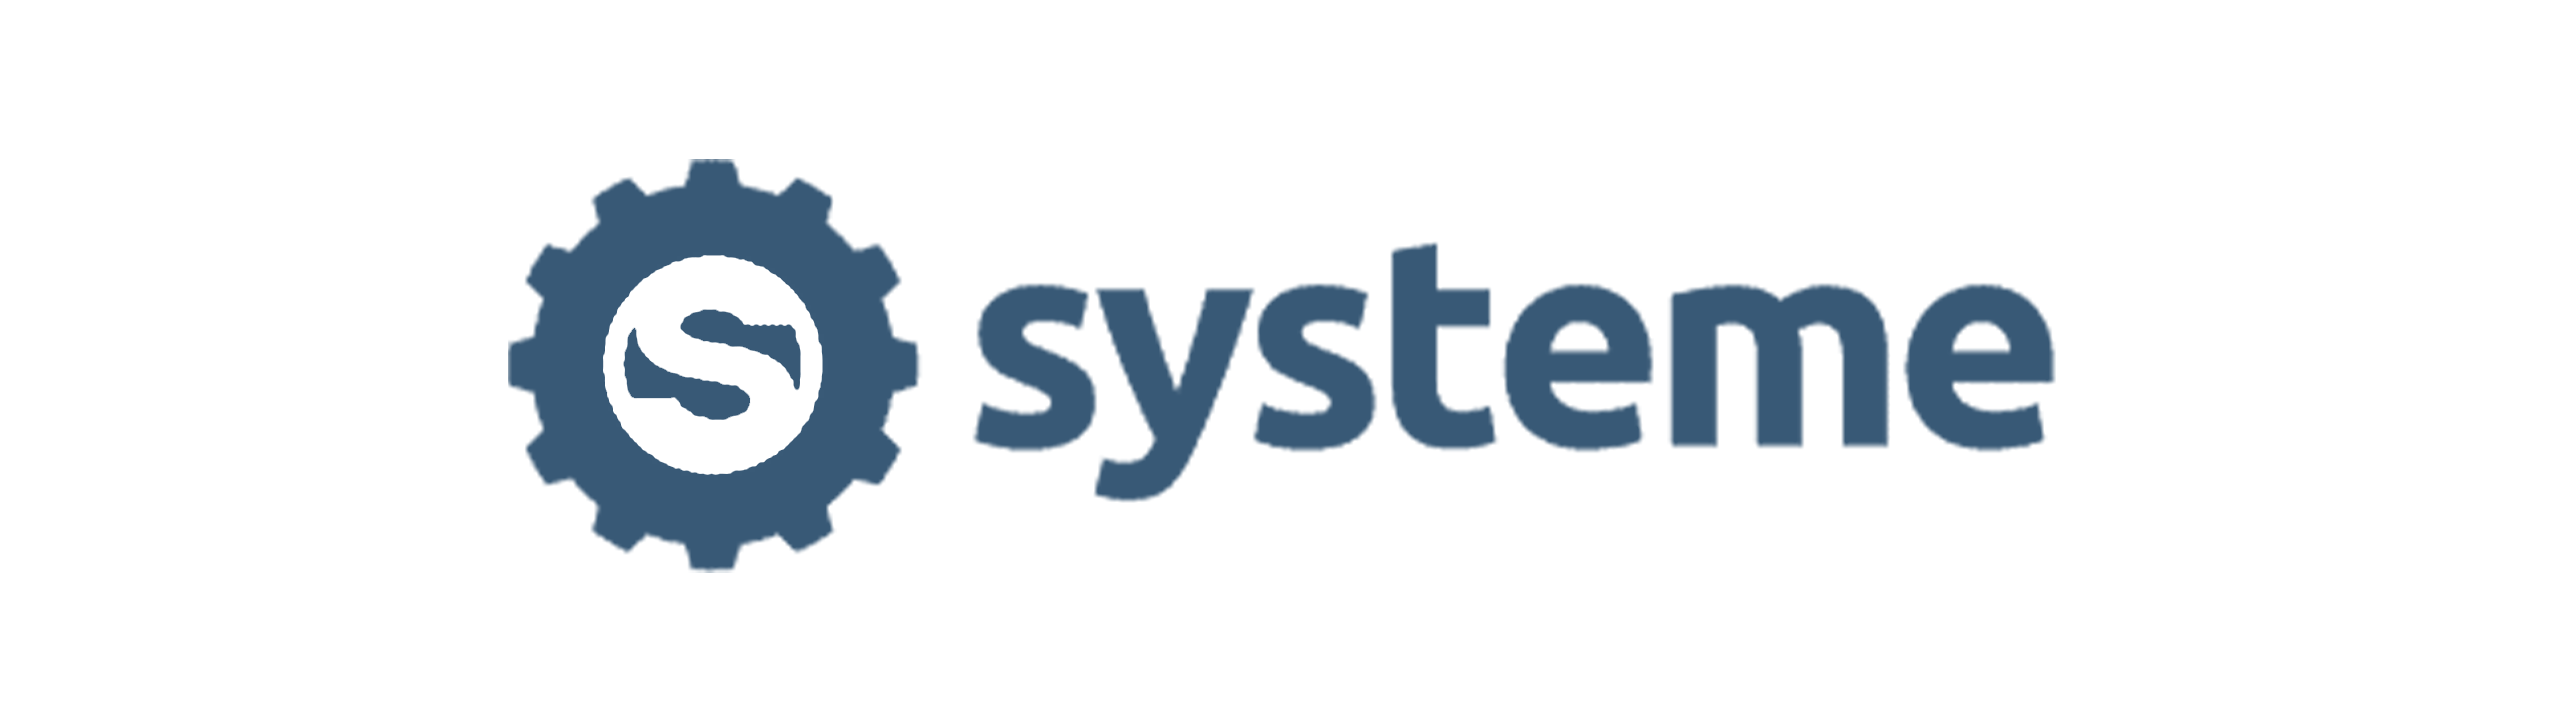 systeme-109